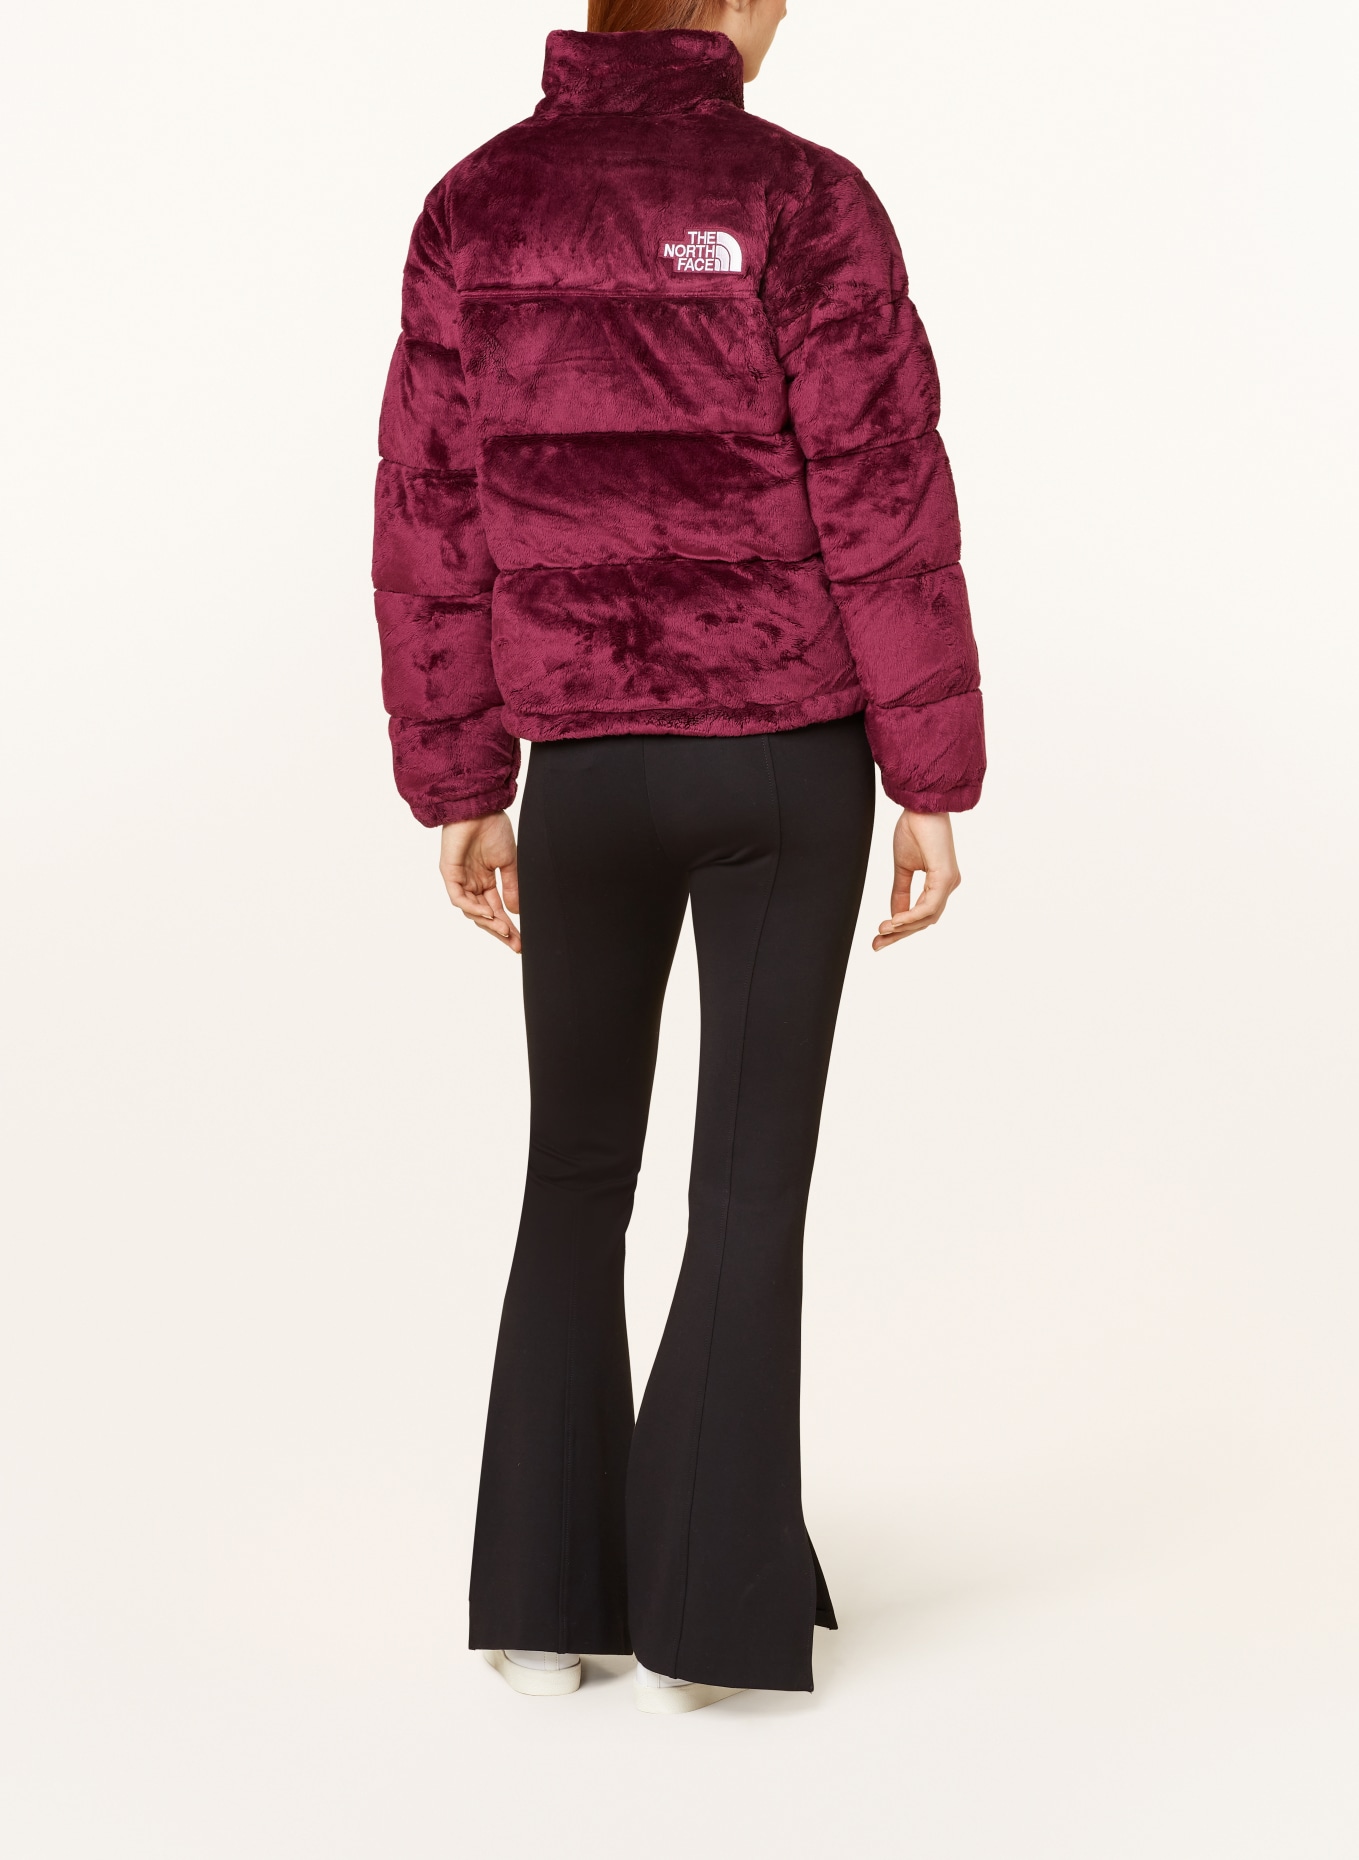 THE NORTH FACE Down jacket VERSA made of faux fur, Color: FUCHSIA (Image 3)